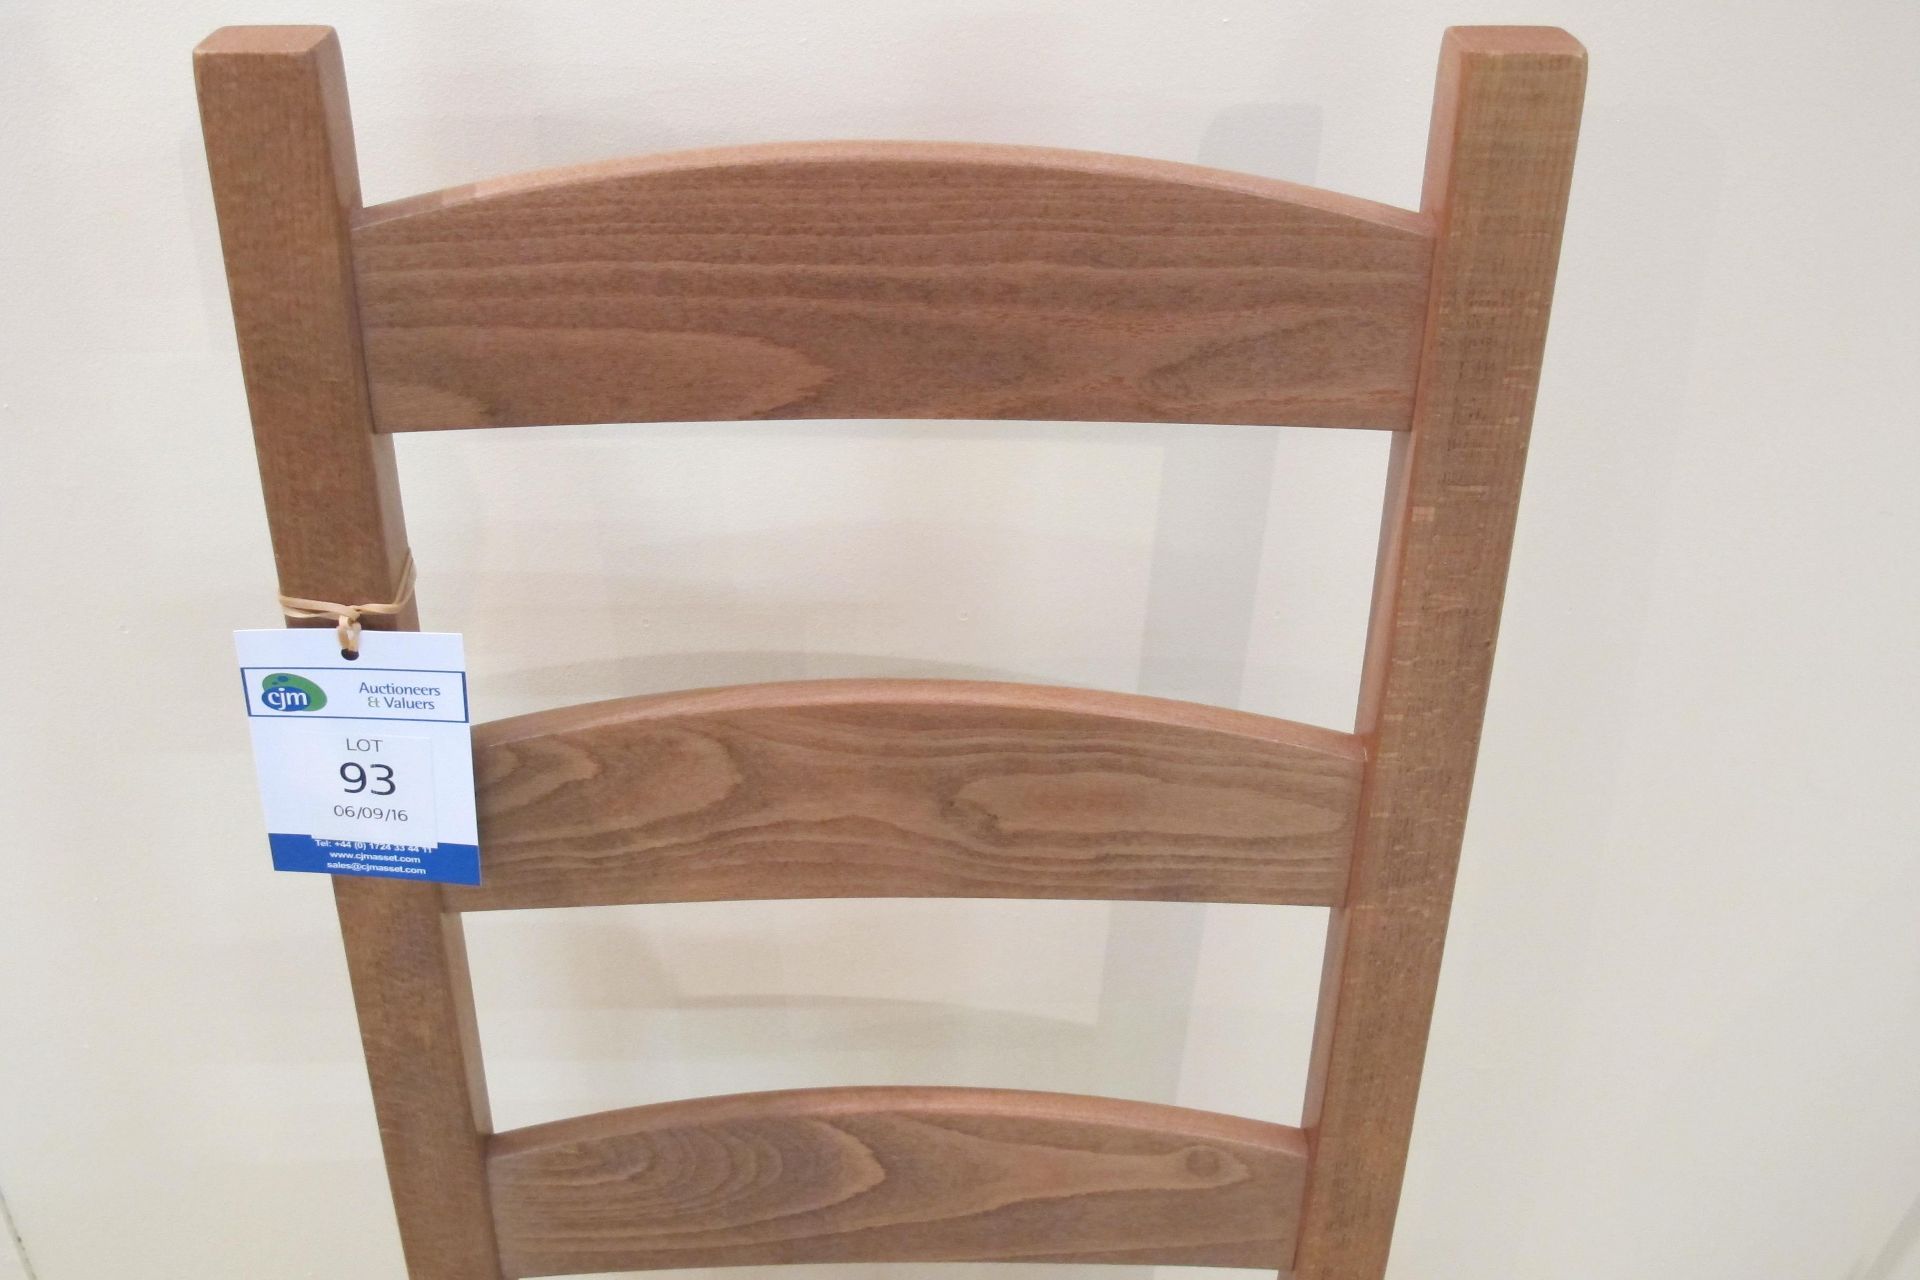 Eaves ladder back chair with olive seat pad. - Image 2 of 3